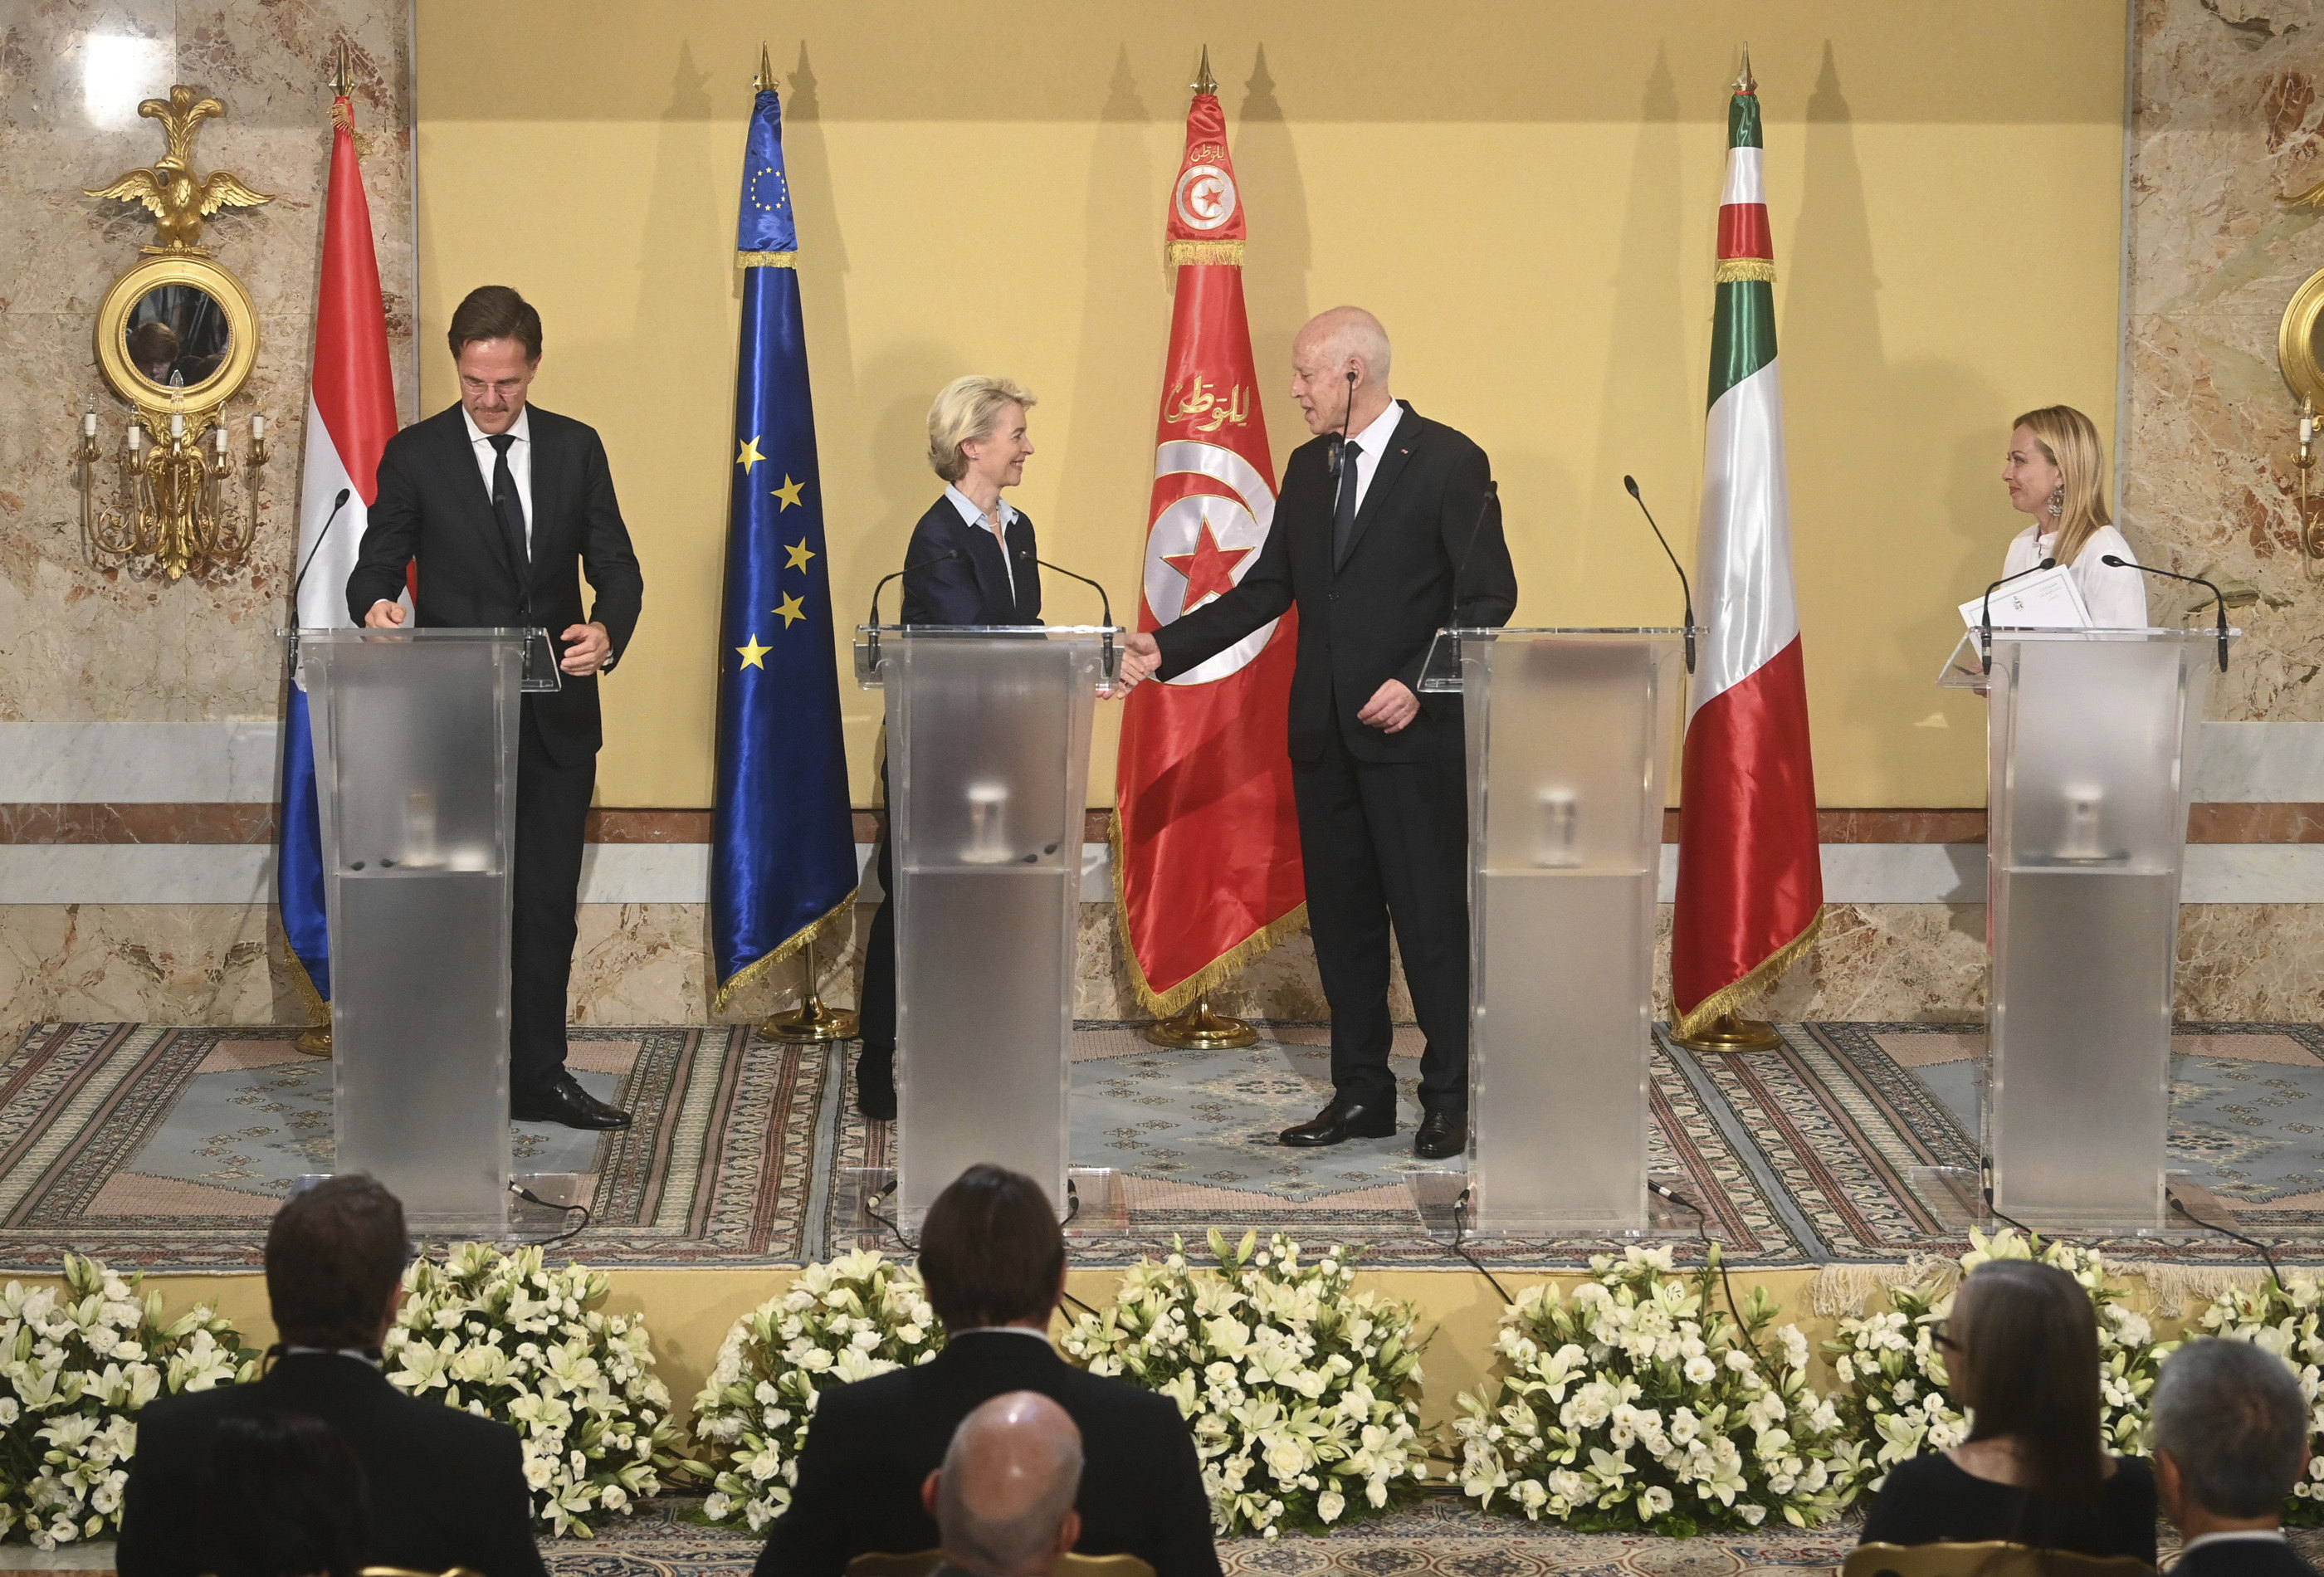 Tunisian President Kais Saied, centre right, shakes hands with  European Commission President Ursula von der Leyen, centre left, during a press conference with Netherlands’ Prime Minister Mark Rutte, left and Italian Prime Minister Giorgia Meloni, at the presidential palace in Carthage, Tunisia on Sunday. Photo: Tunisian Presidency via AP